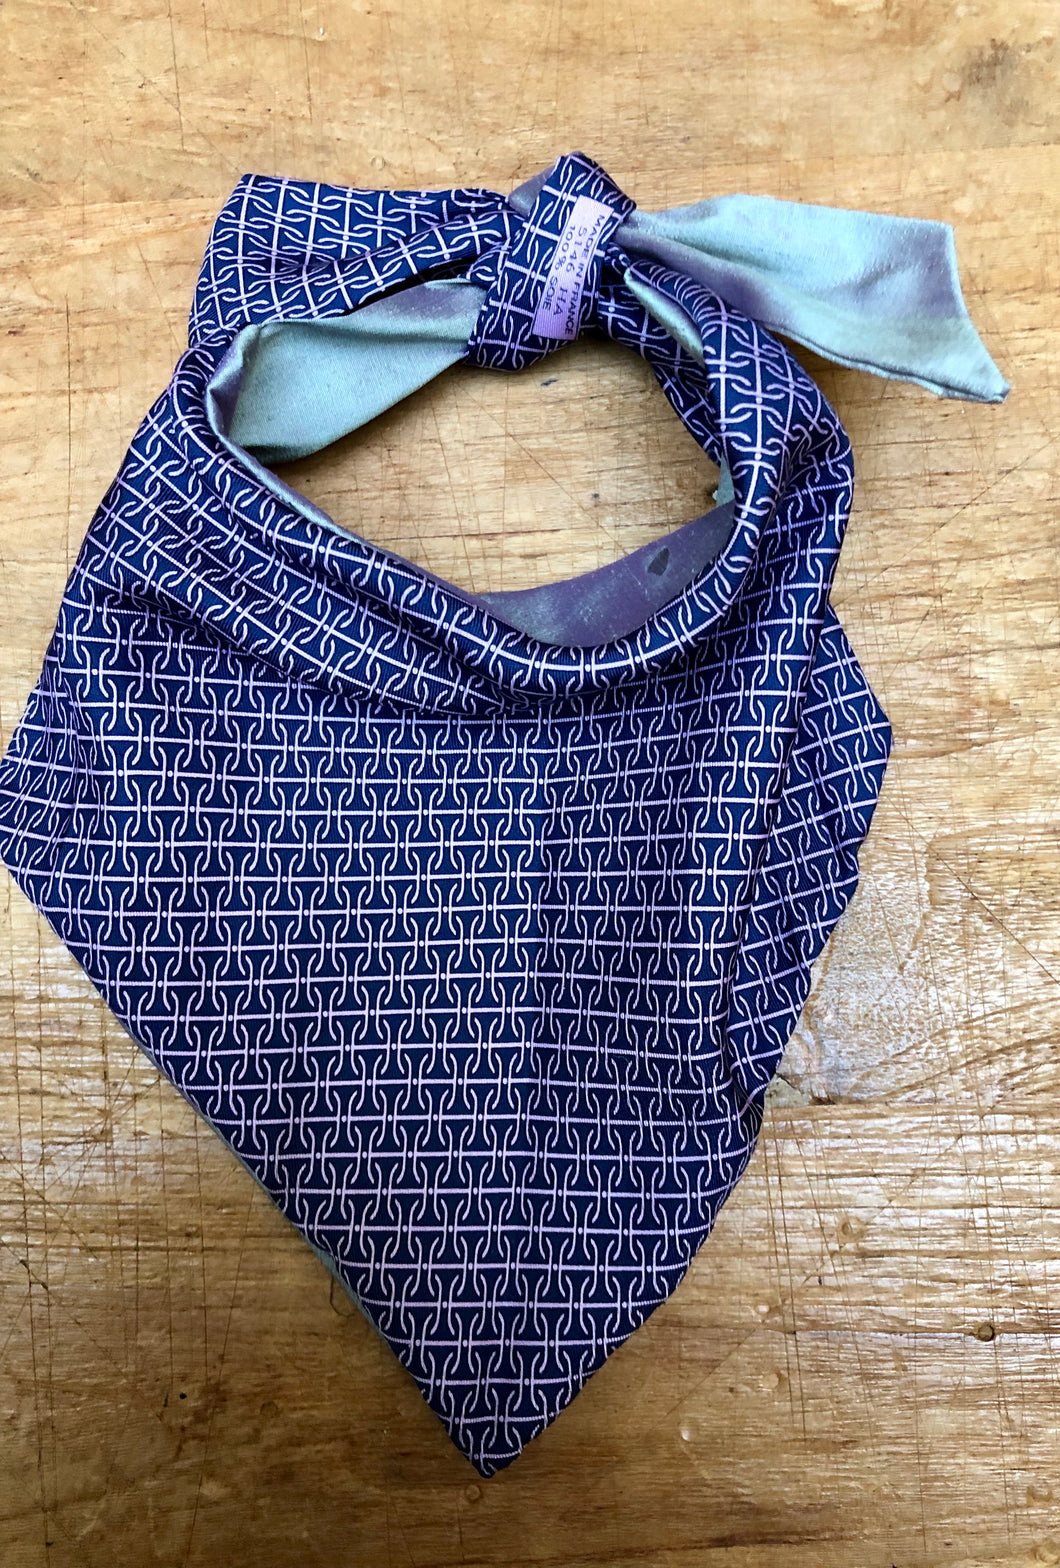 Choker recycled made of Hermes silk tie.